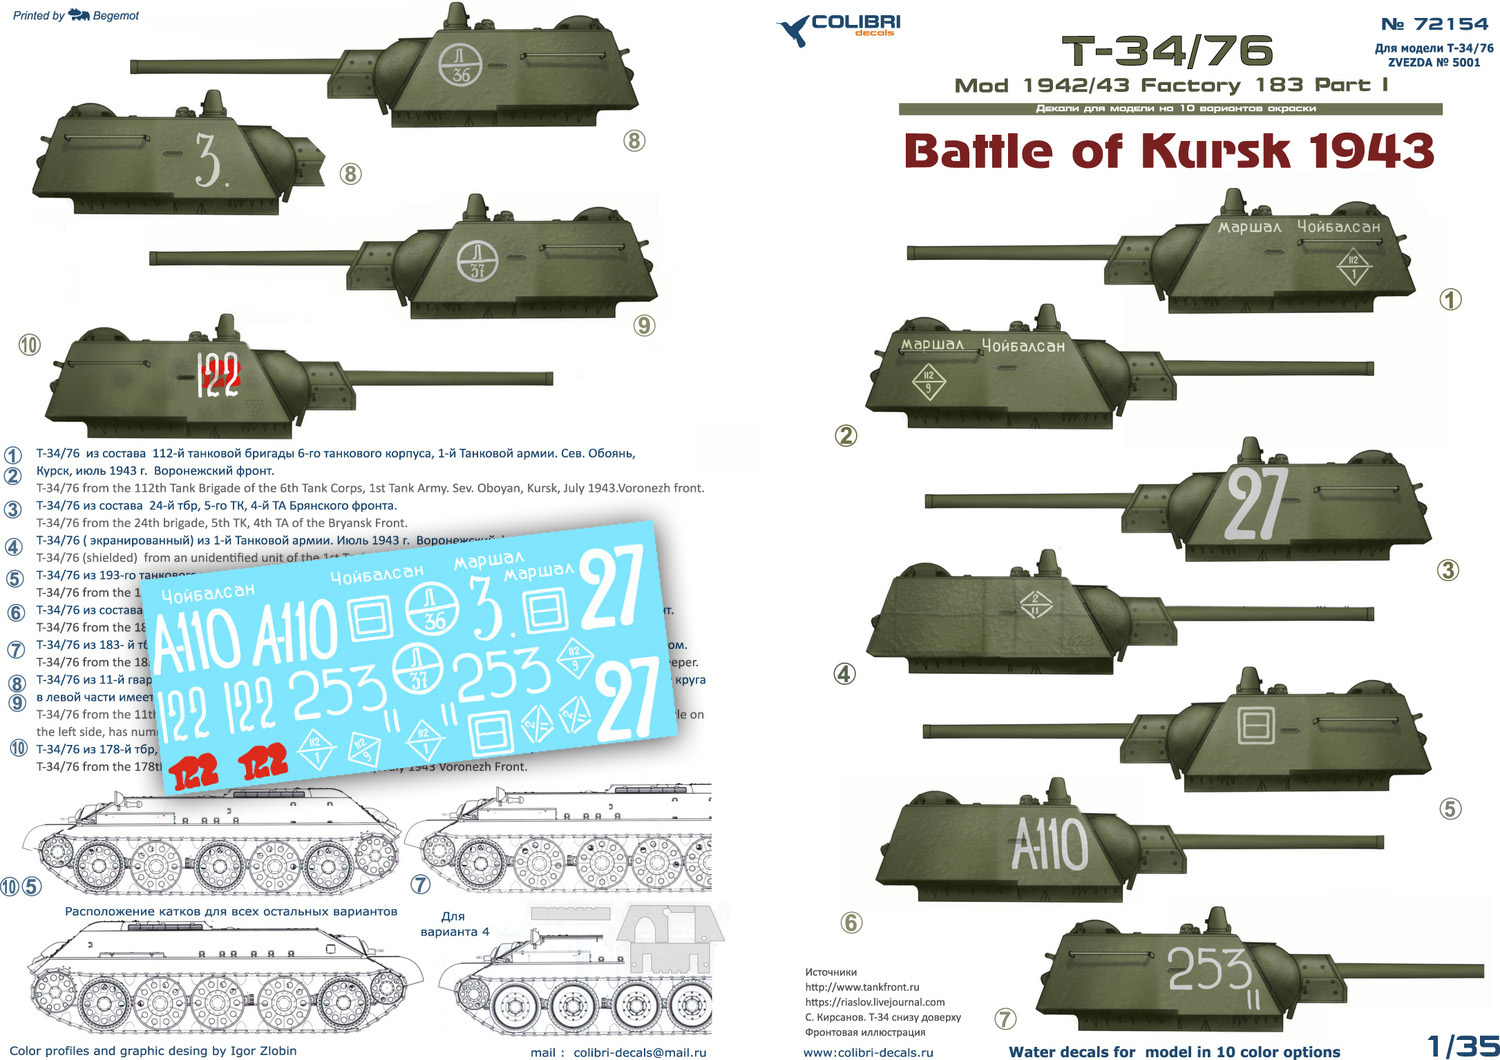 Decal 1/72 Т-34/76 мod 1942/43 Factory 183 Part I Battle of Kursk 1943 (35090) (Colibri Decals)